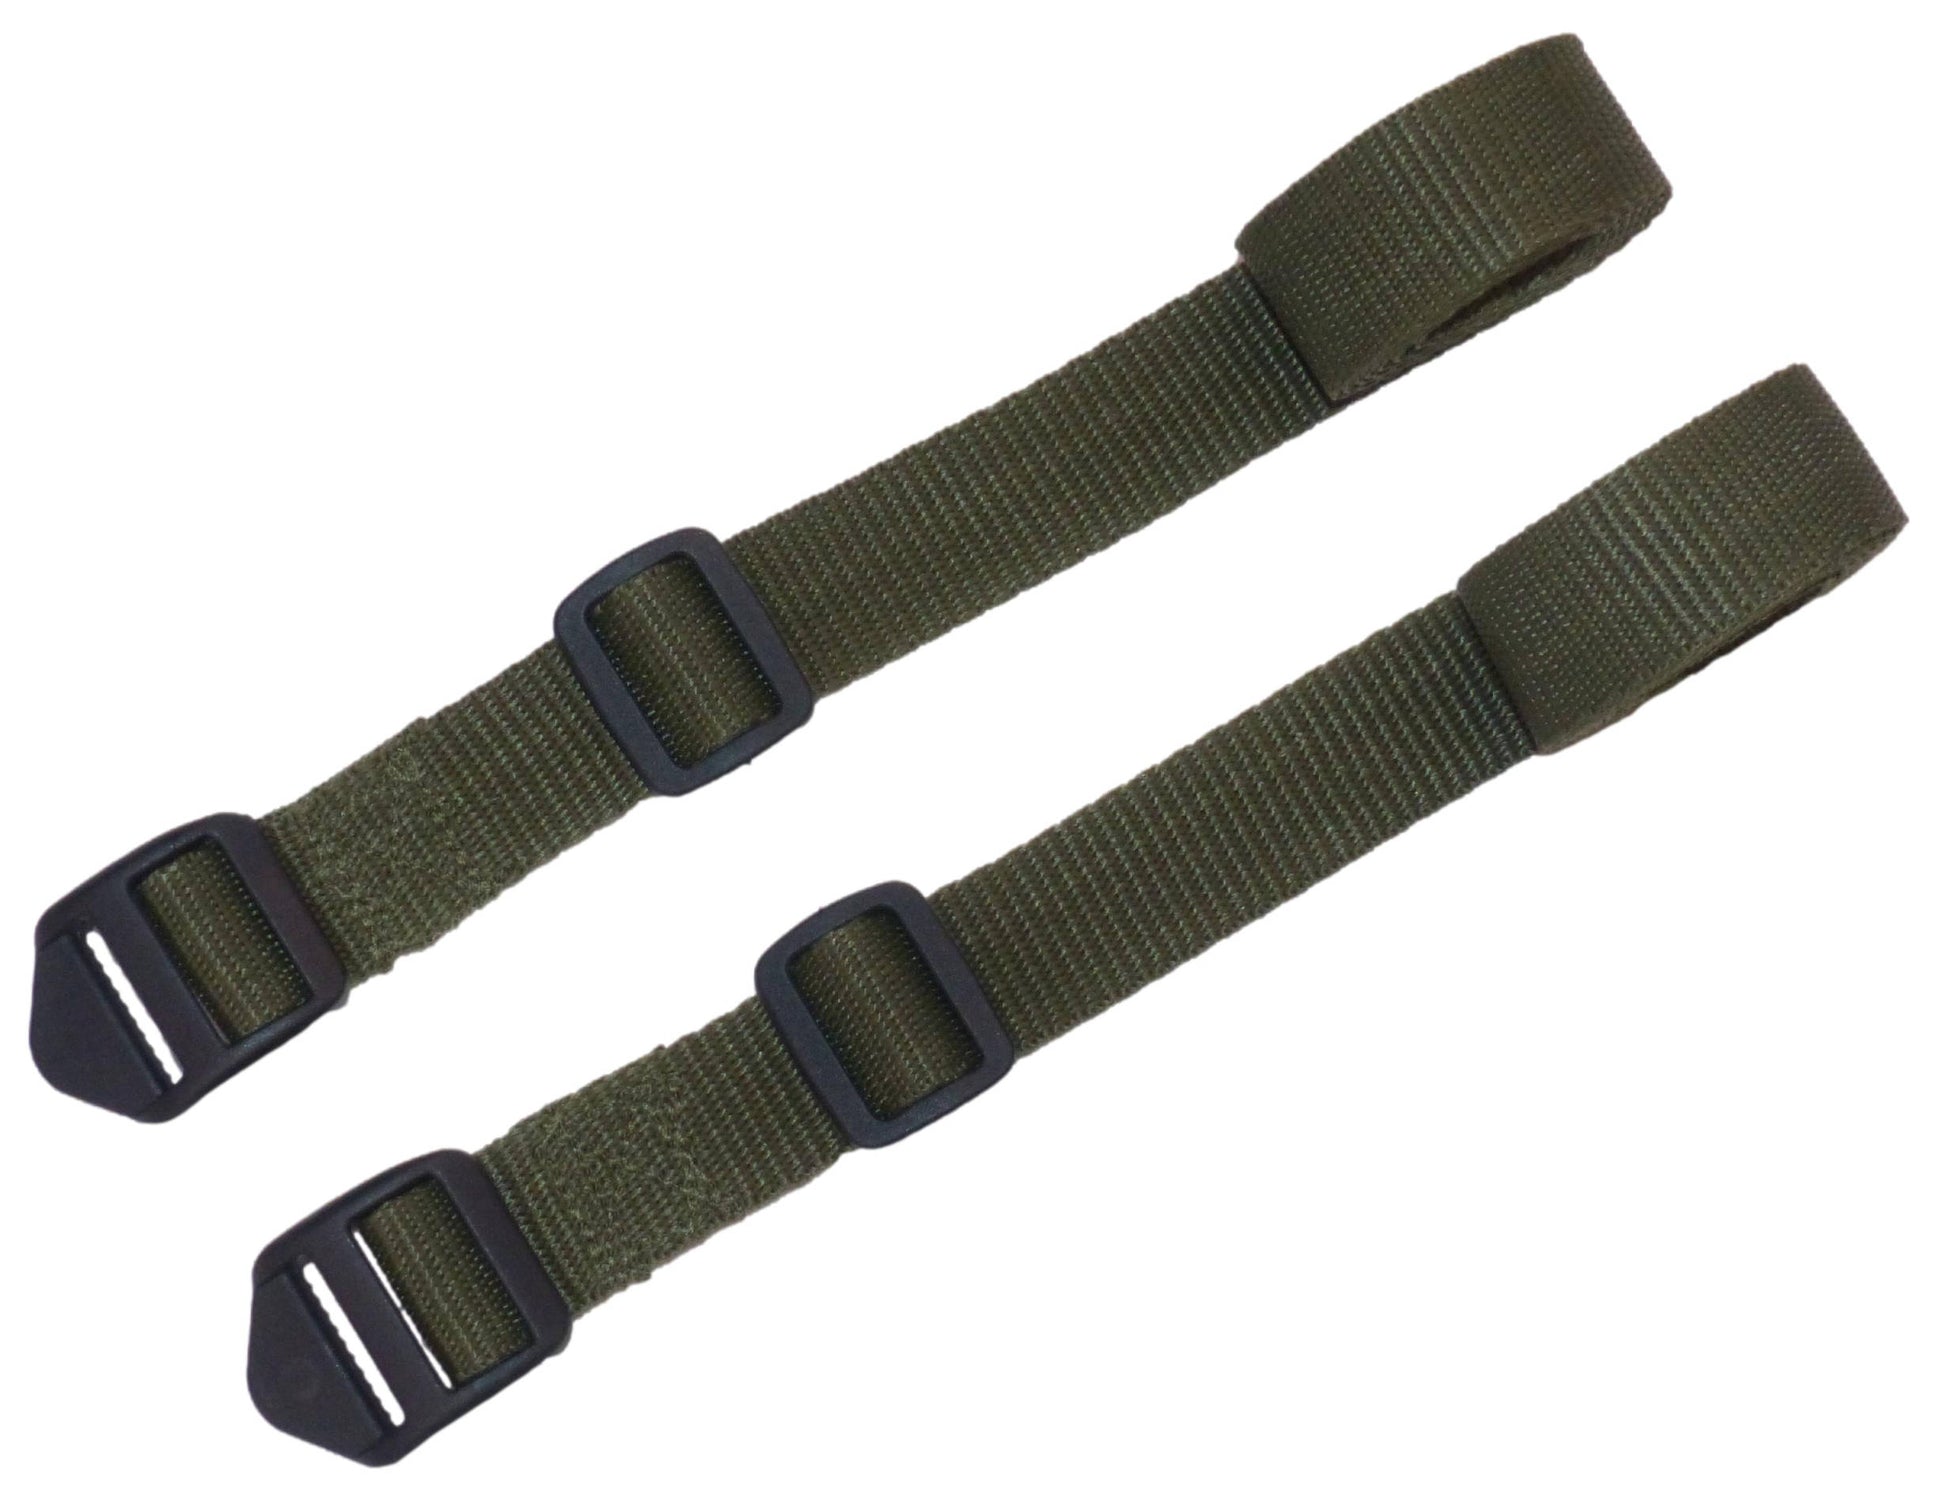 Benristraps 25mm Webbing Strap with Ladderloc Buckle (Pair) in olive green